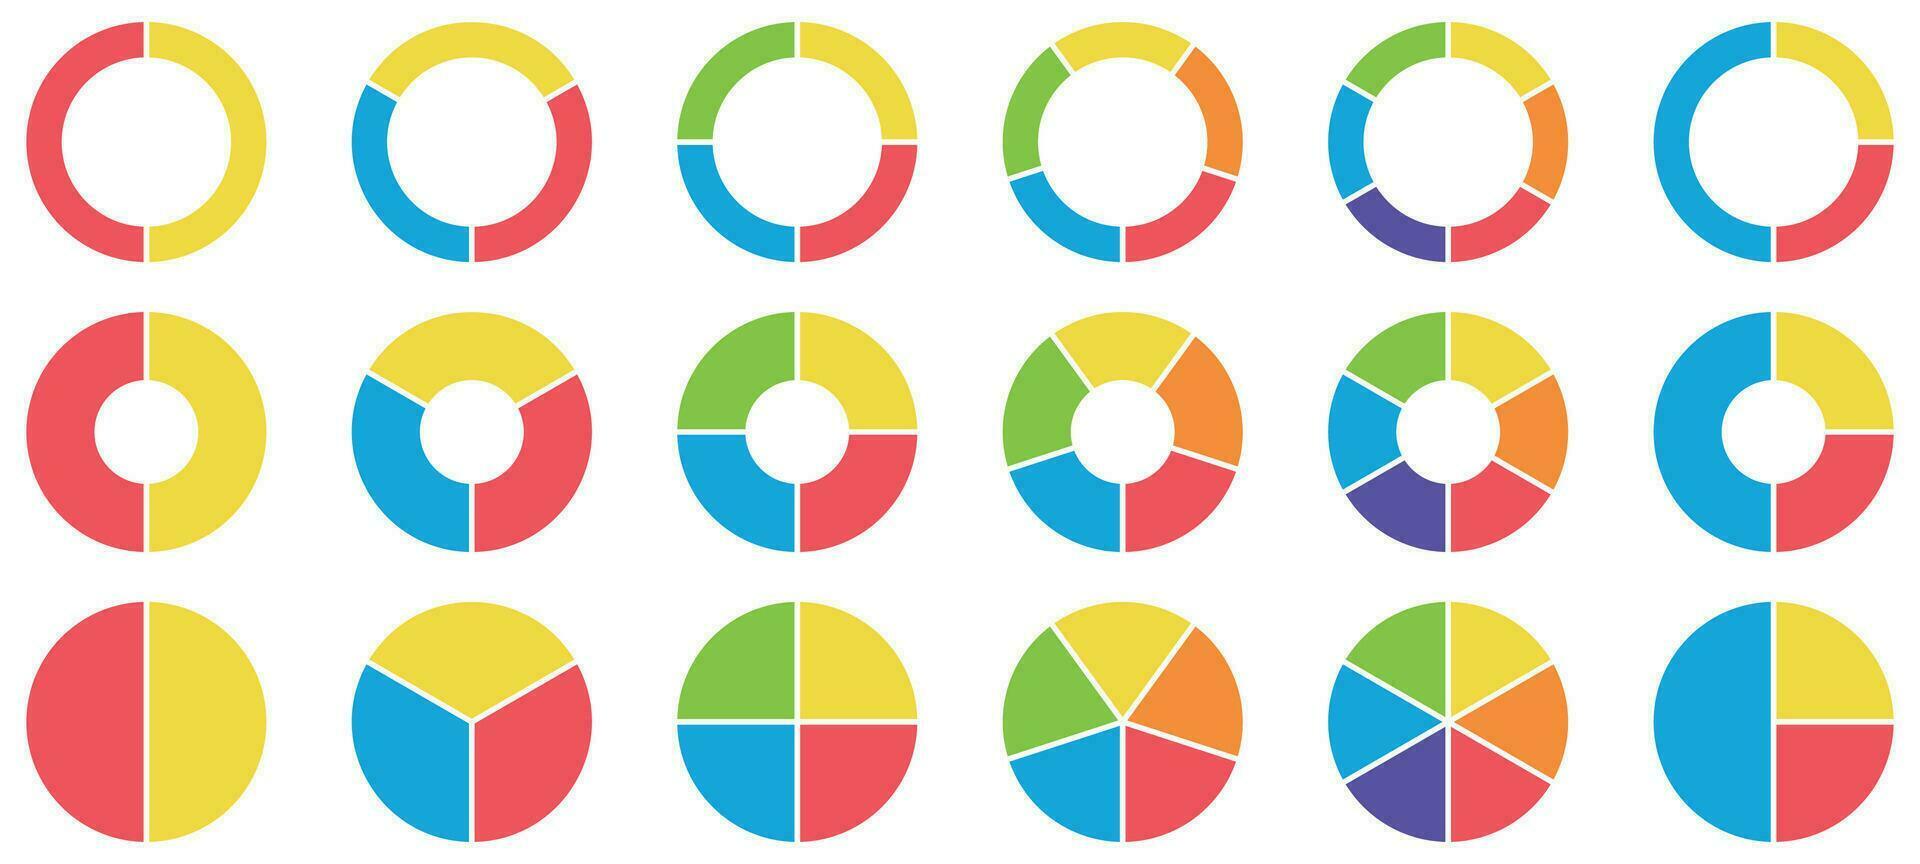 Colorful pie and donut charts. Circle chart, circle sections and round donuts chart pieces. Business infographic vector set